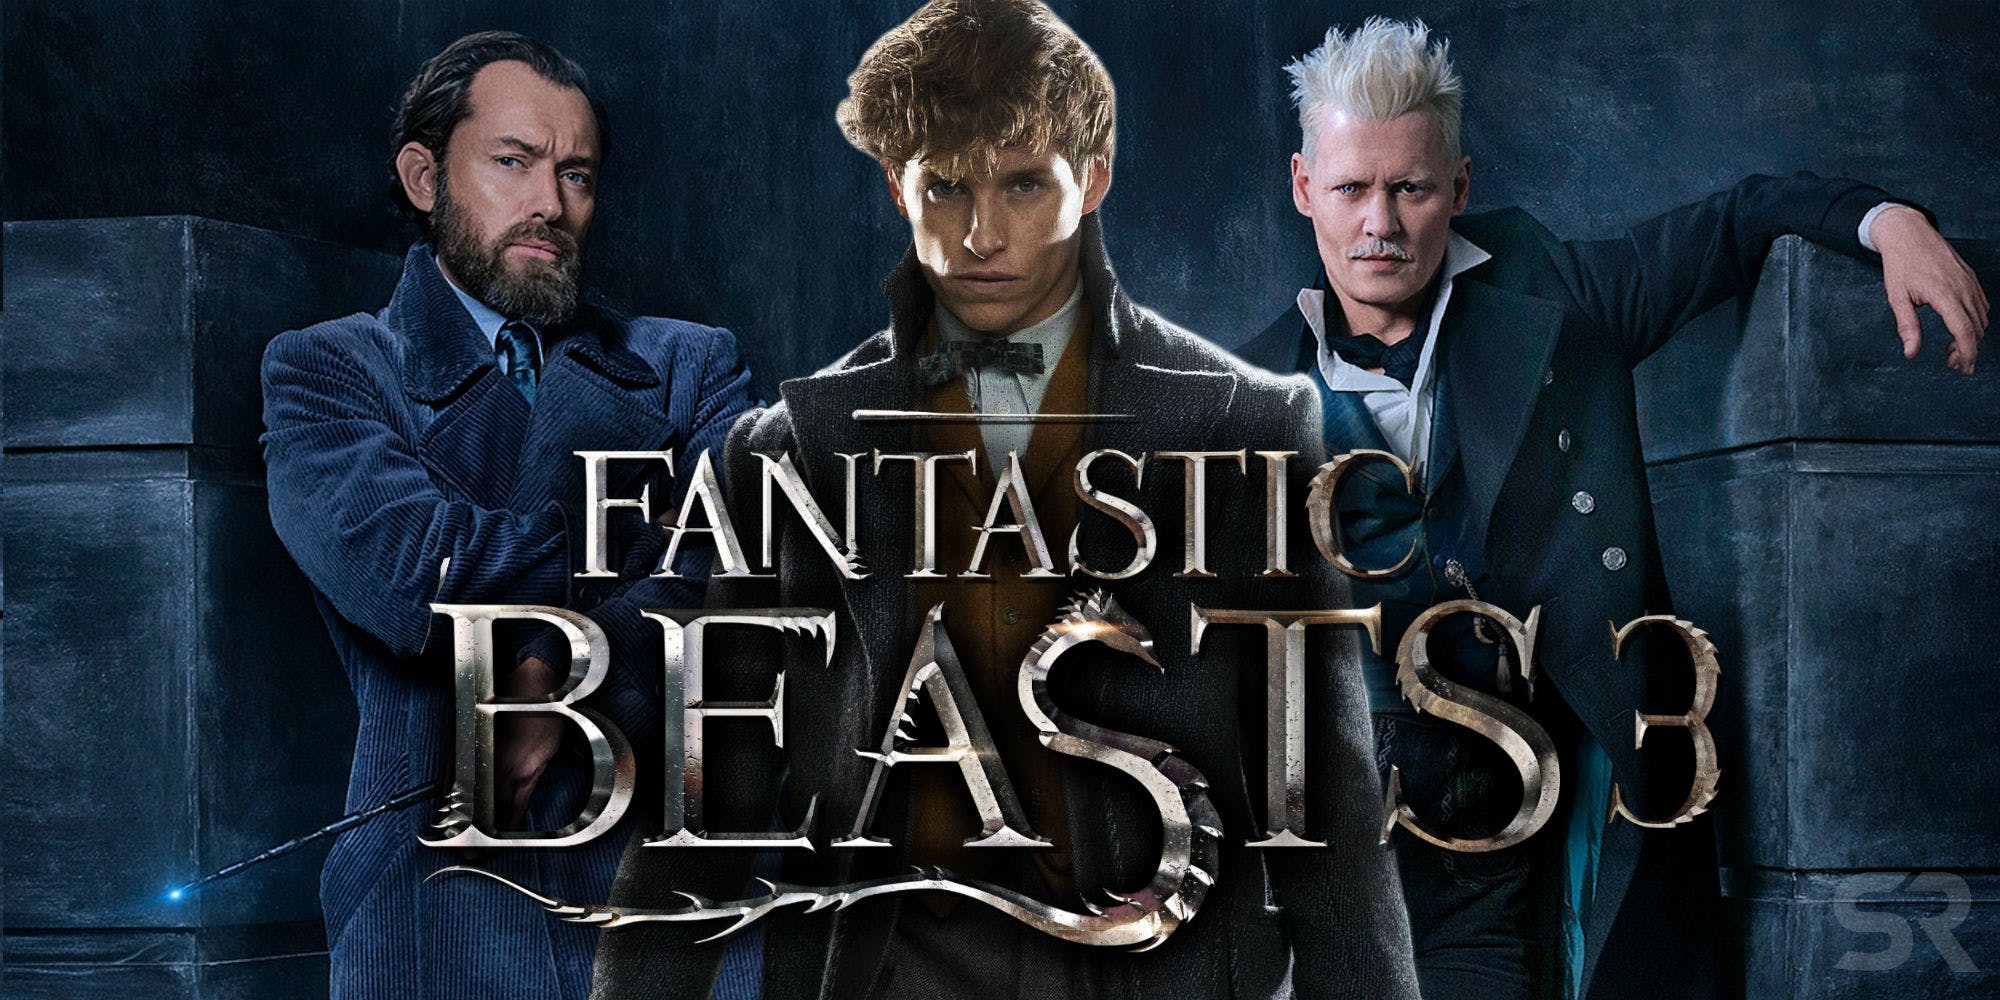 The Fantastic Beasts 3 trailer returns viewers to the Great Hall, where Jacob receives a wand. – The UBJ – United Business Journal